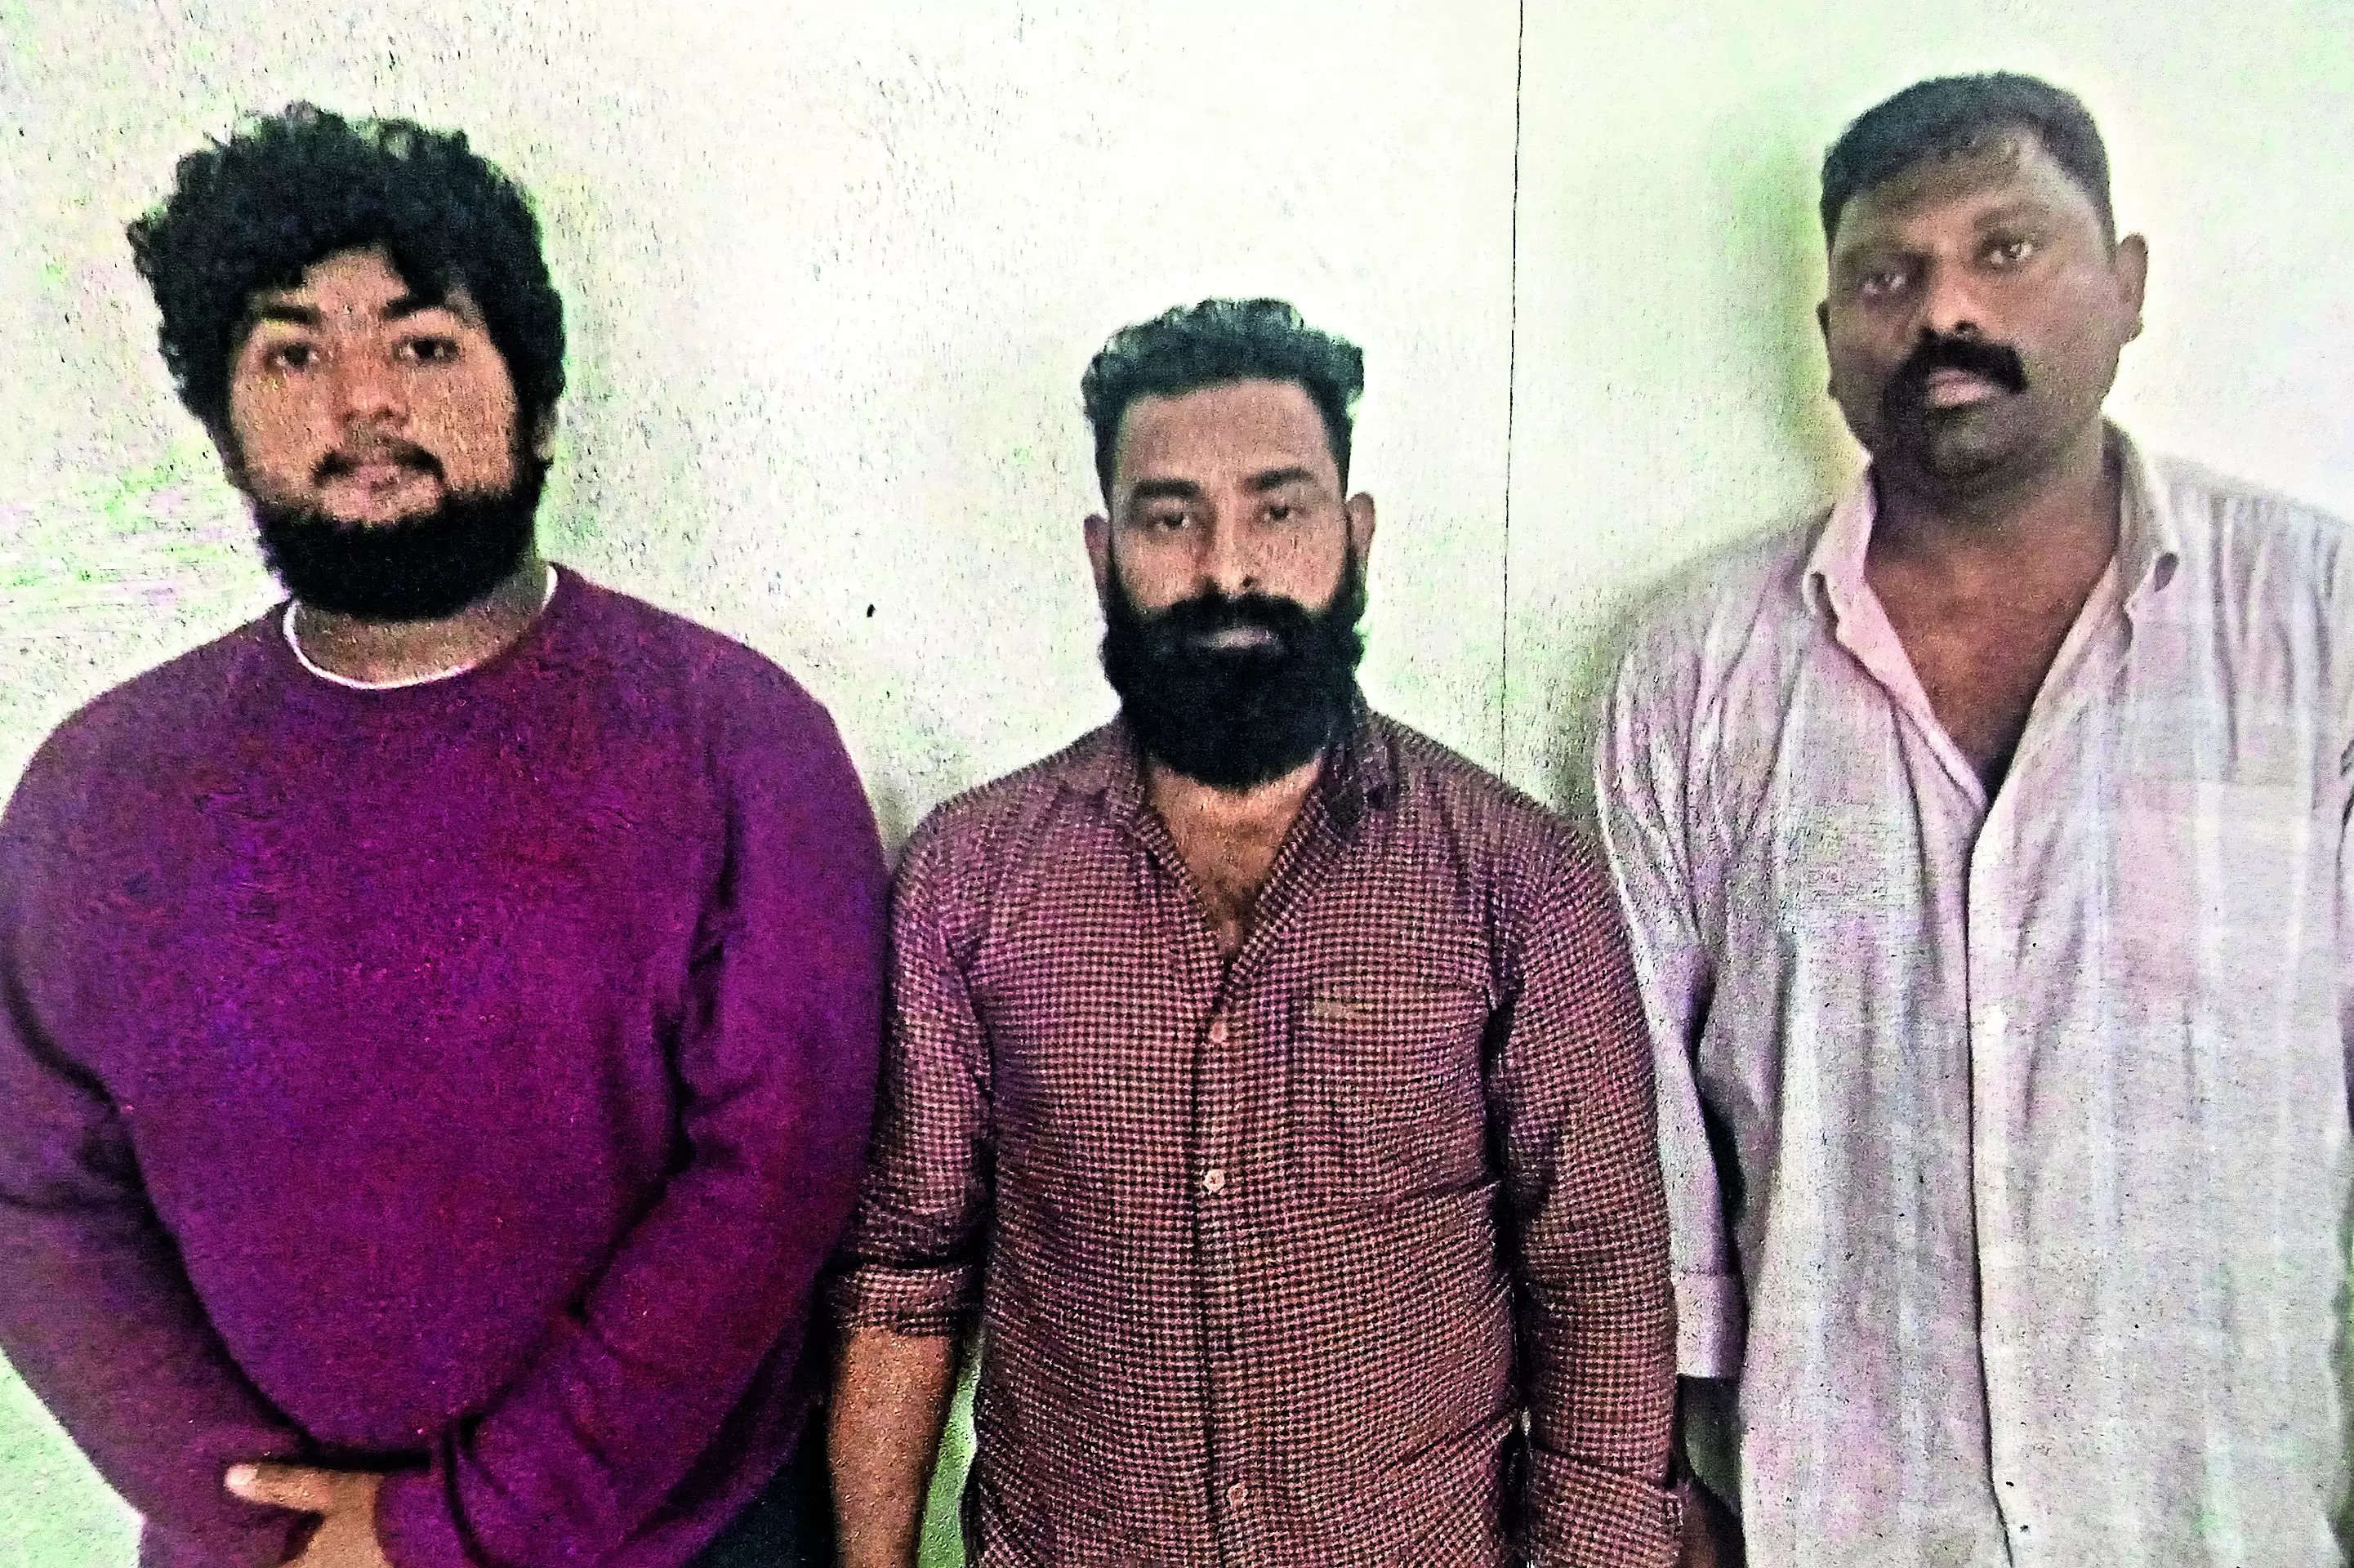 Trio held for kidnapping, robbing auditor of ₹10 lakh at knifepoint